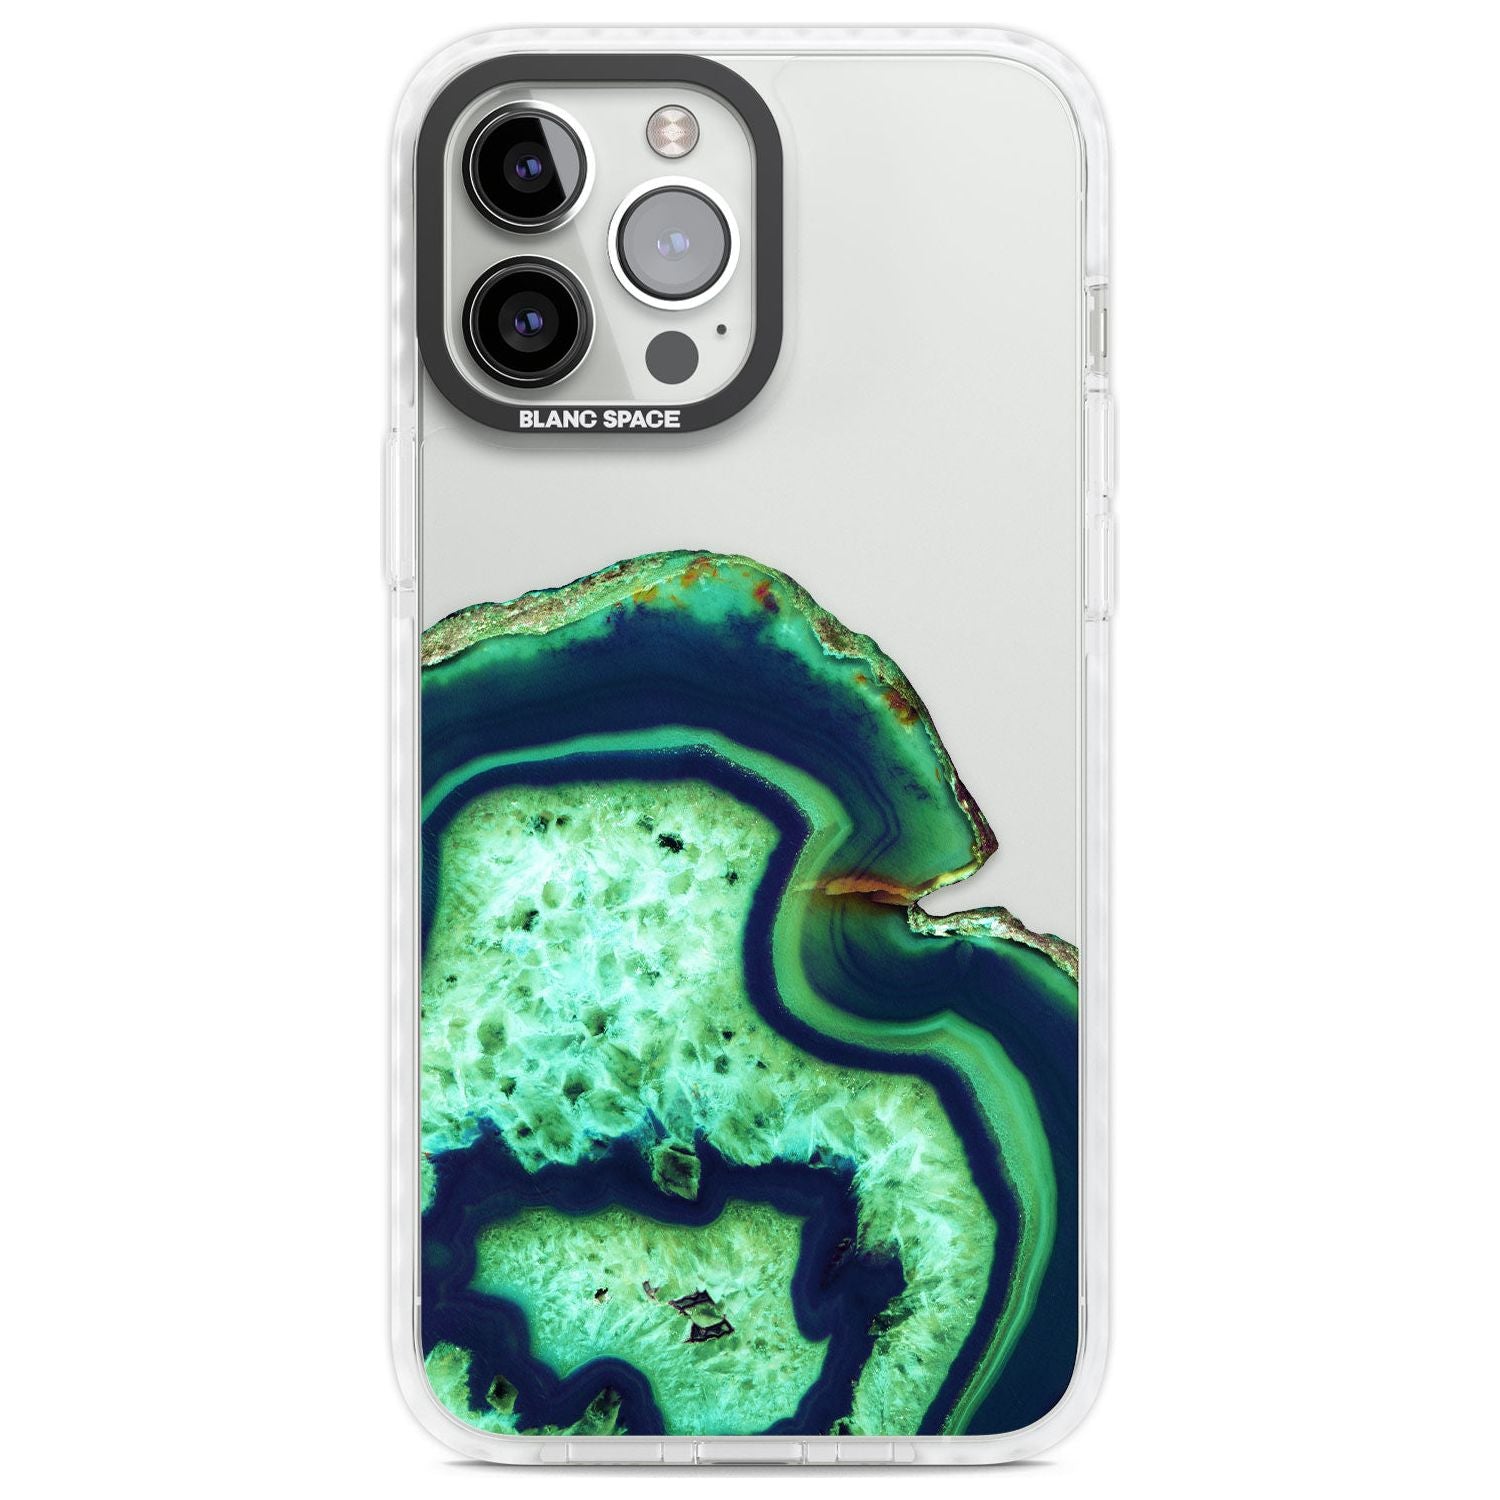 Neon Green & Blue Agate Crystal Transparent Design Phone Case iPhone 13 Pro Max / Impact Case,iPhone 14 Pro Max / Impact Case Blanc Space